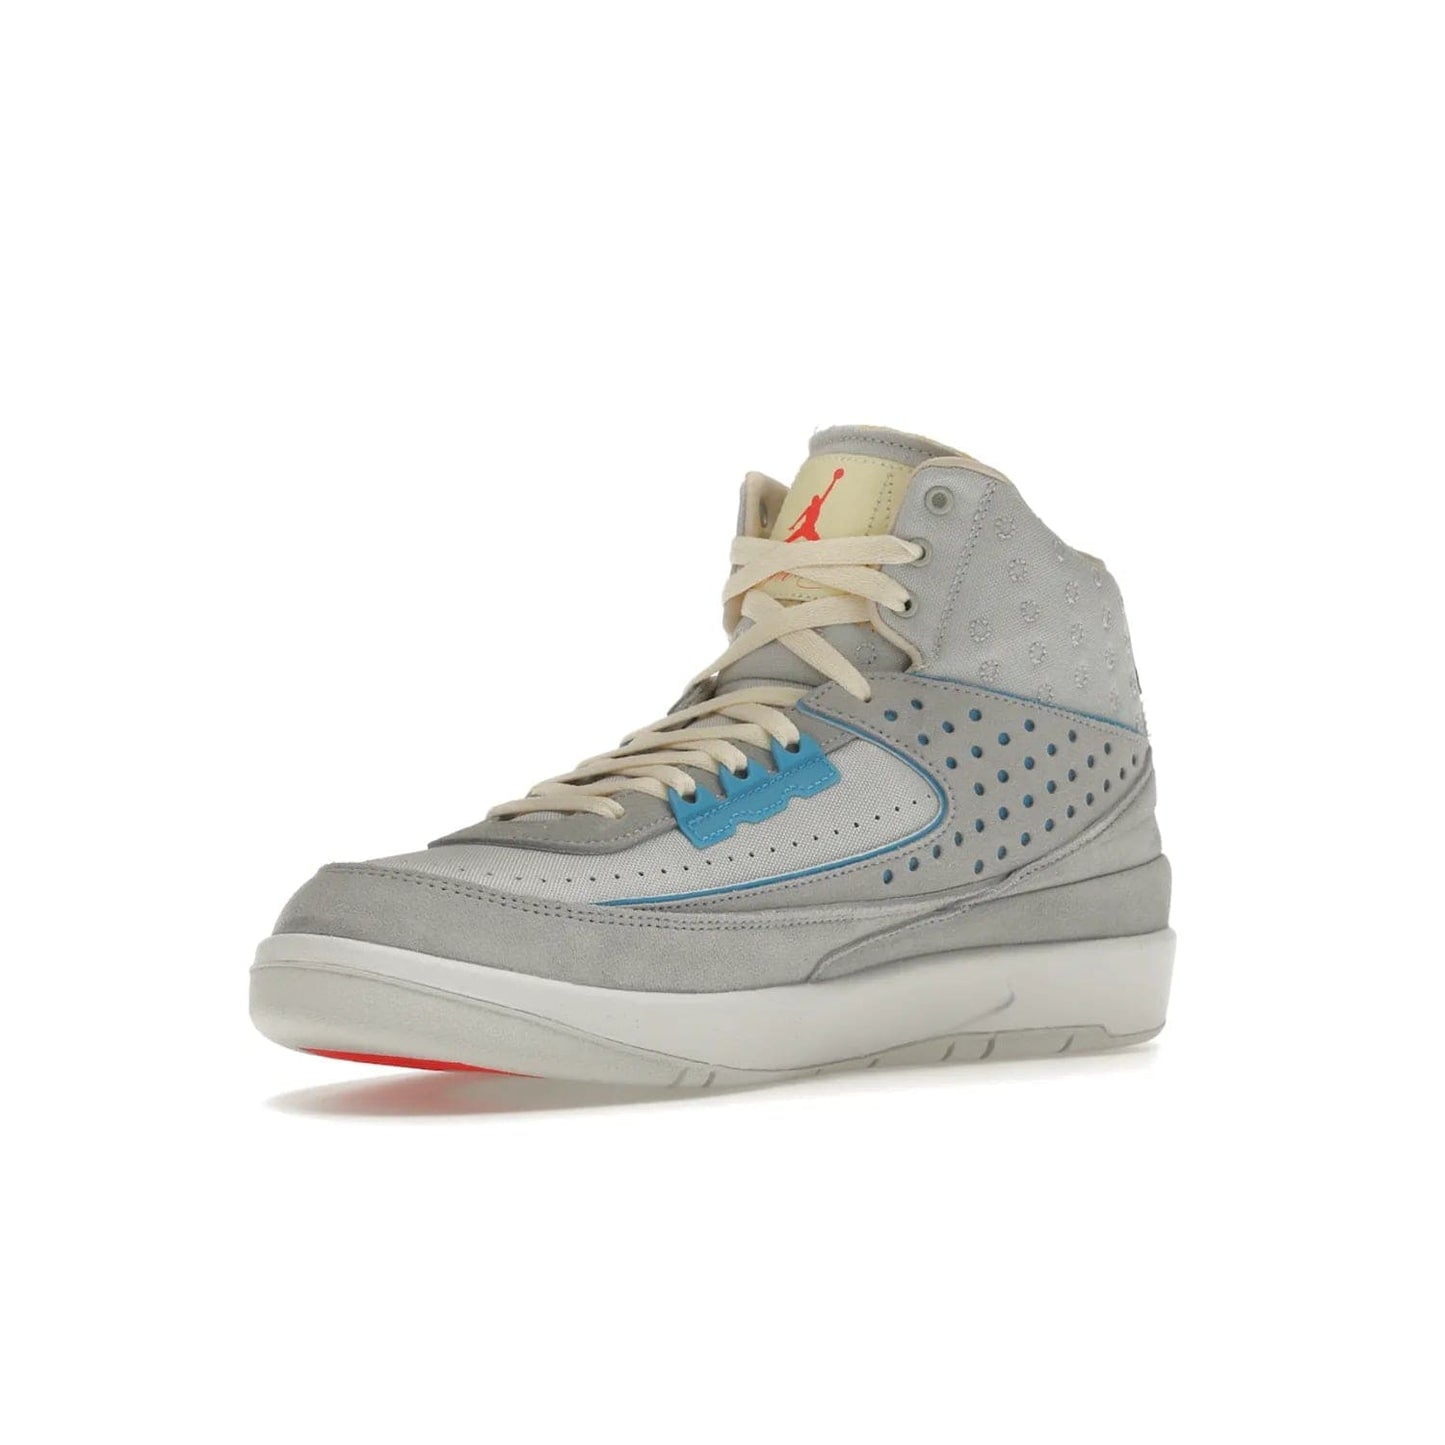 Jordan 2 Retro SP Union Grey Fog - Image 15 - Only at www.BallersClubKickz.com - Introducing the Air Jordan 2 Retro SP Union Grey Fog. This intricate sneaker design features a grey canvas upper with light blue eyelets, eyestay patches, and piping, plus custom external tags. Dropping in April 2022, this exclusive release offers a worn-in look and feel.